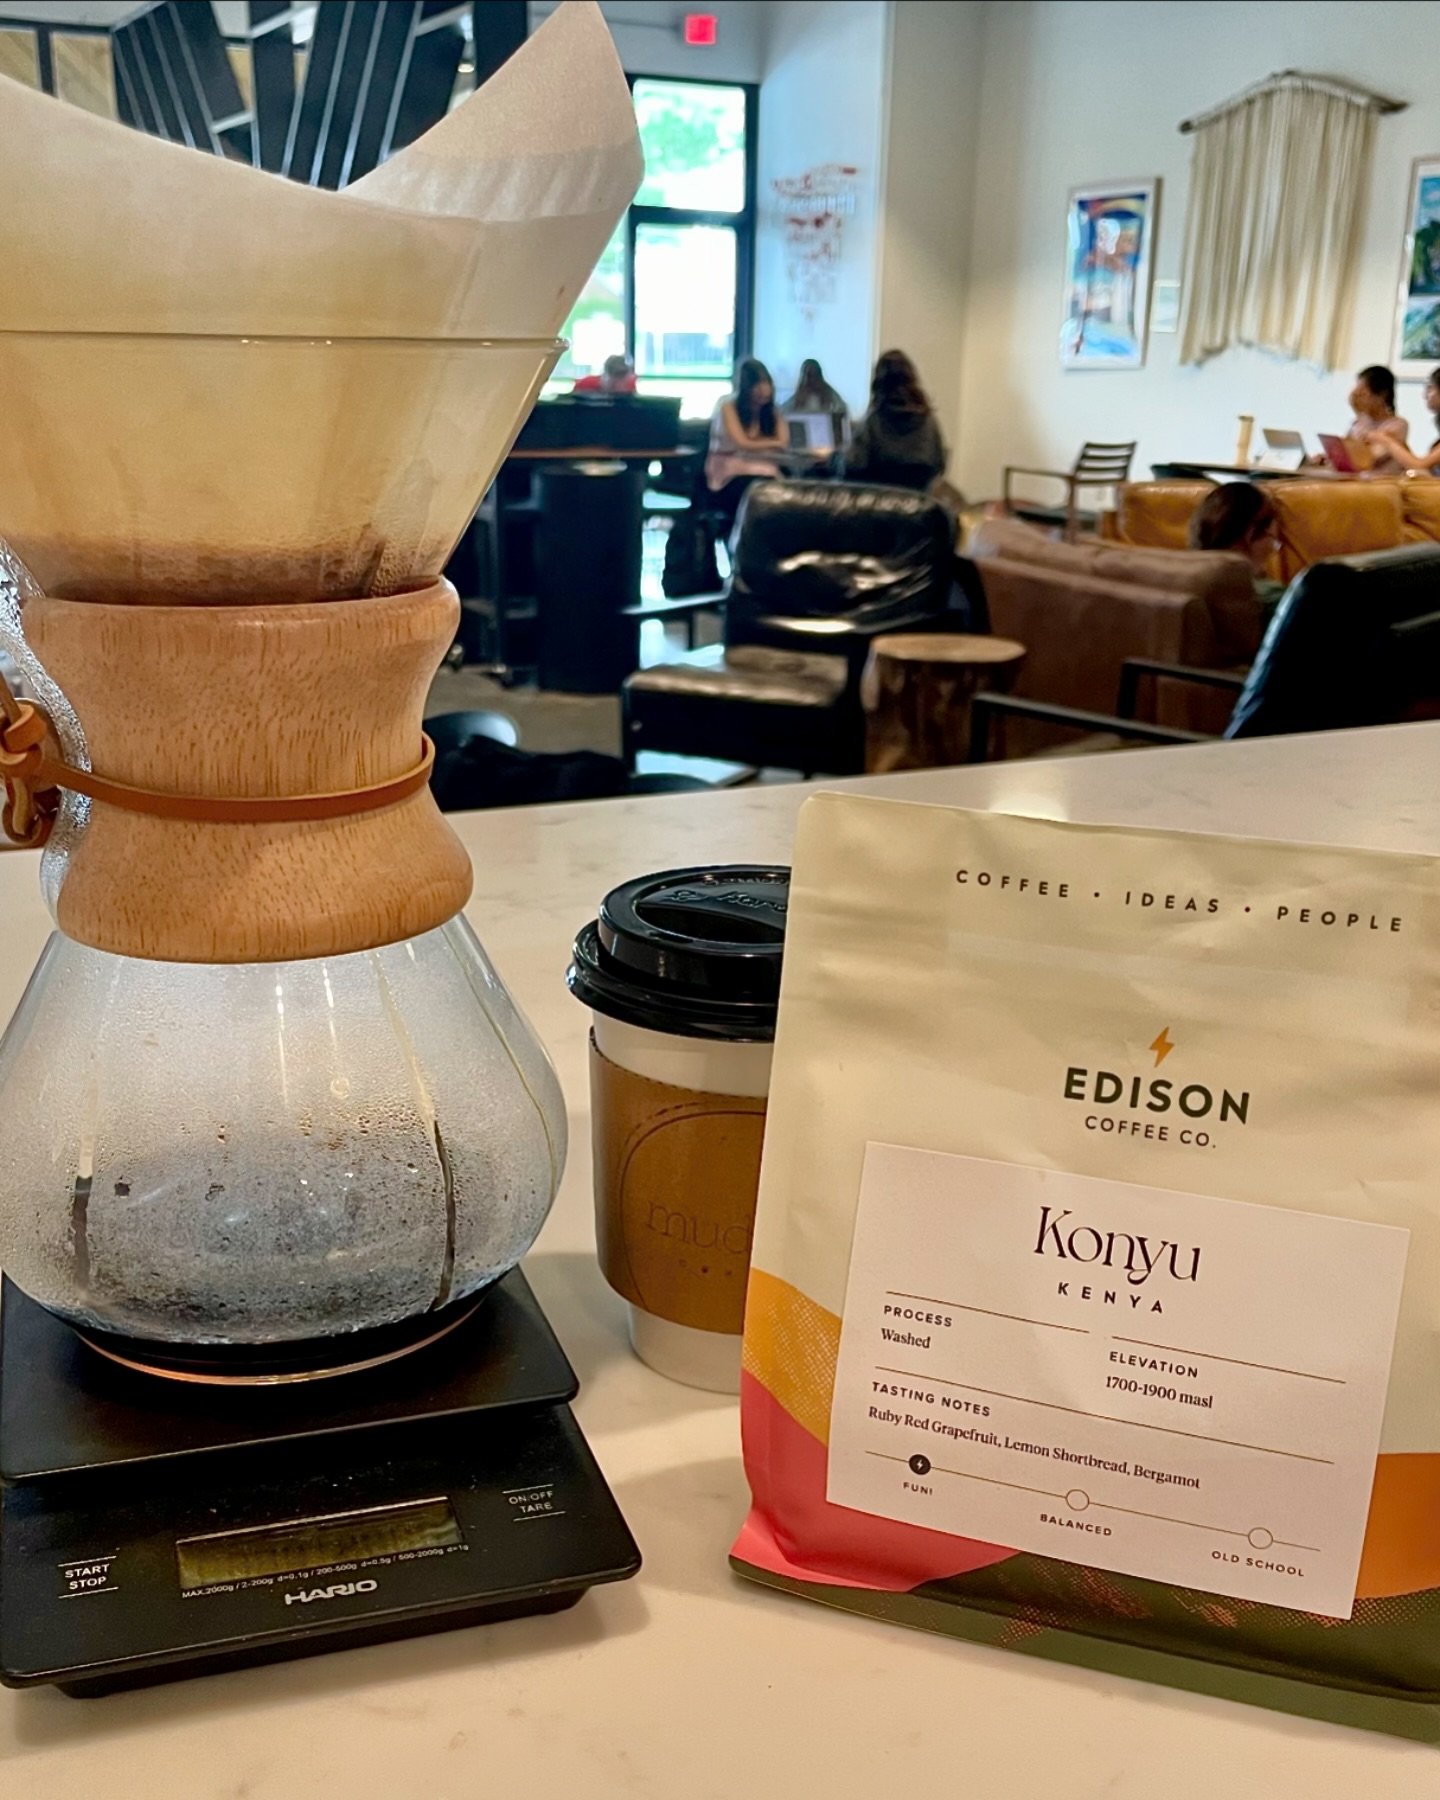 We have a new pour over!

Edison&rsquo;s &ldquo;Konyu&rdquo; is a washed process with notes of:
&bull; lemon shortbread 
&bull; ruby grapefruit 
&bull; bergamot 

Come grab a cup while supplies last!

#pourover #coffeeshop #cozycoffee